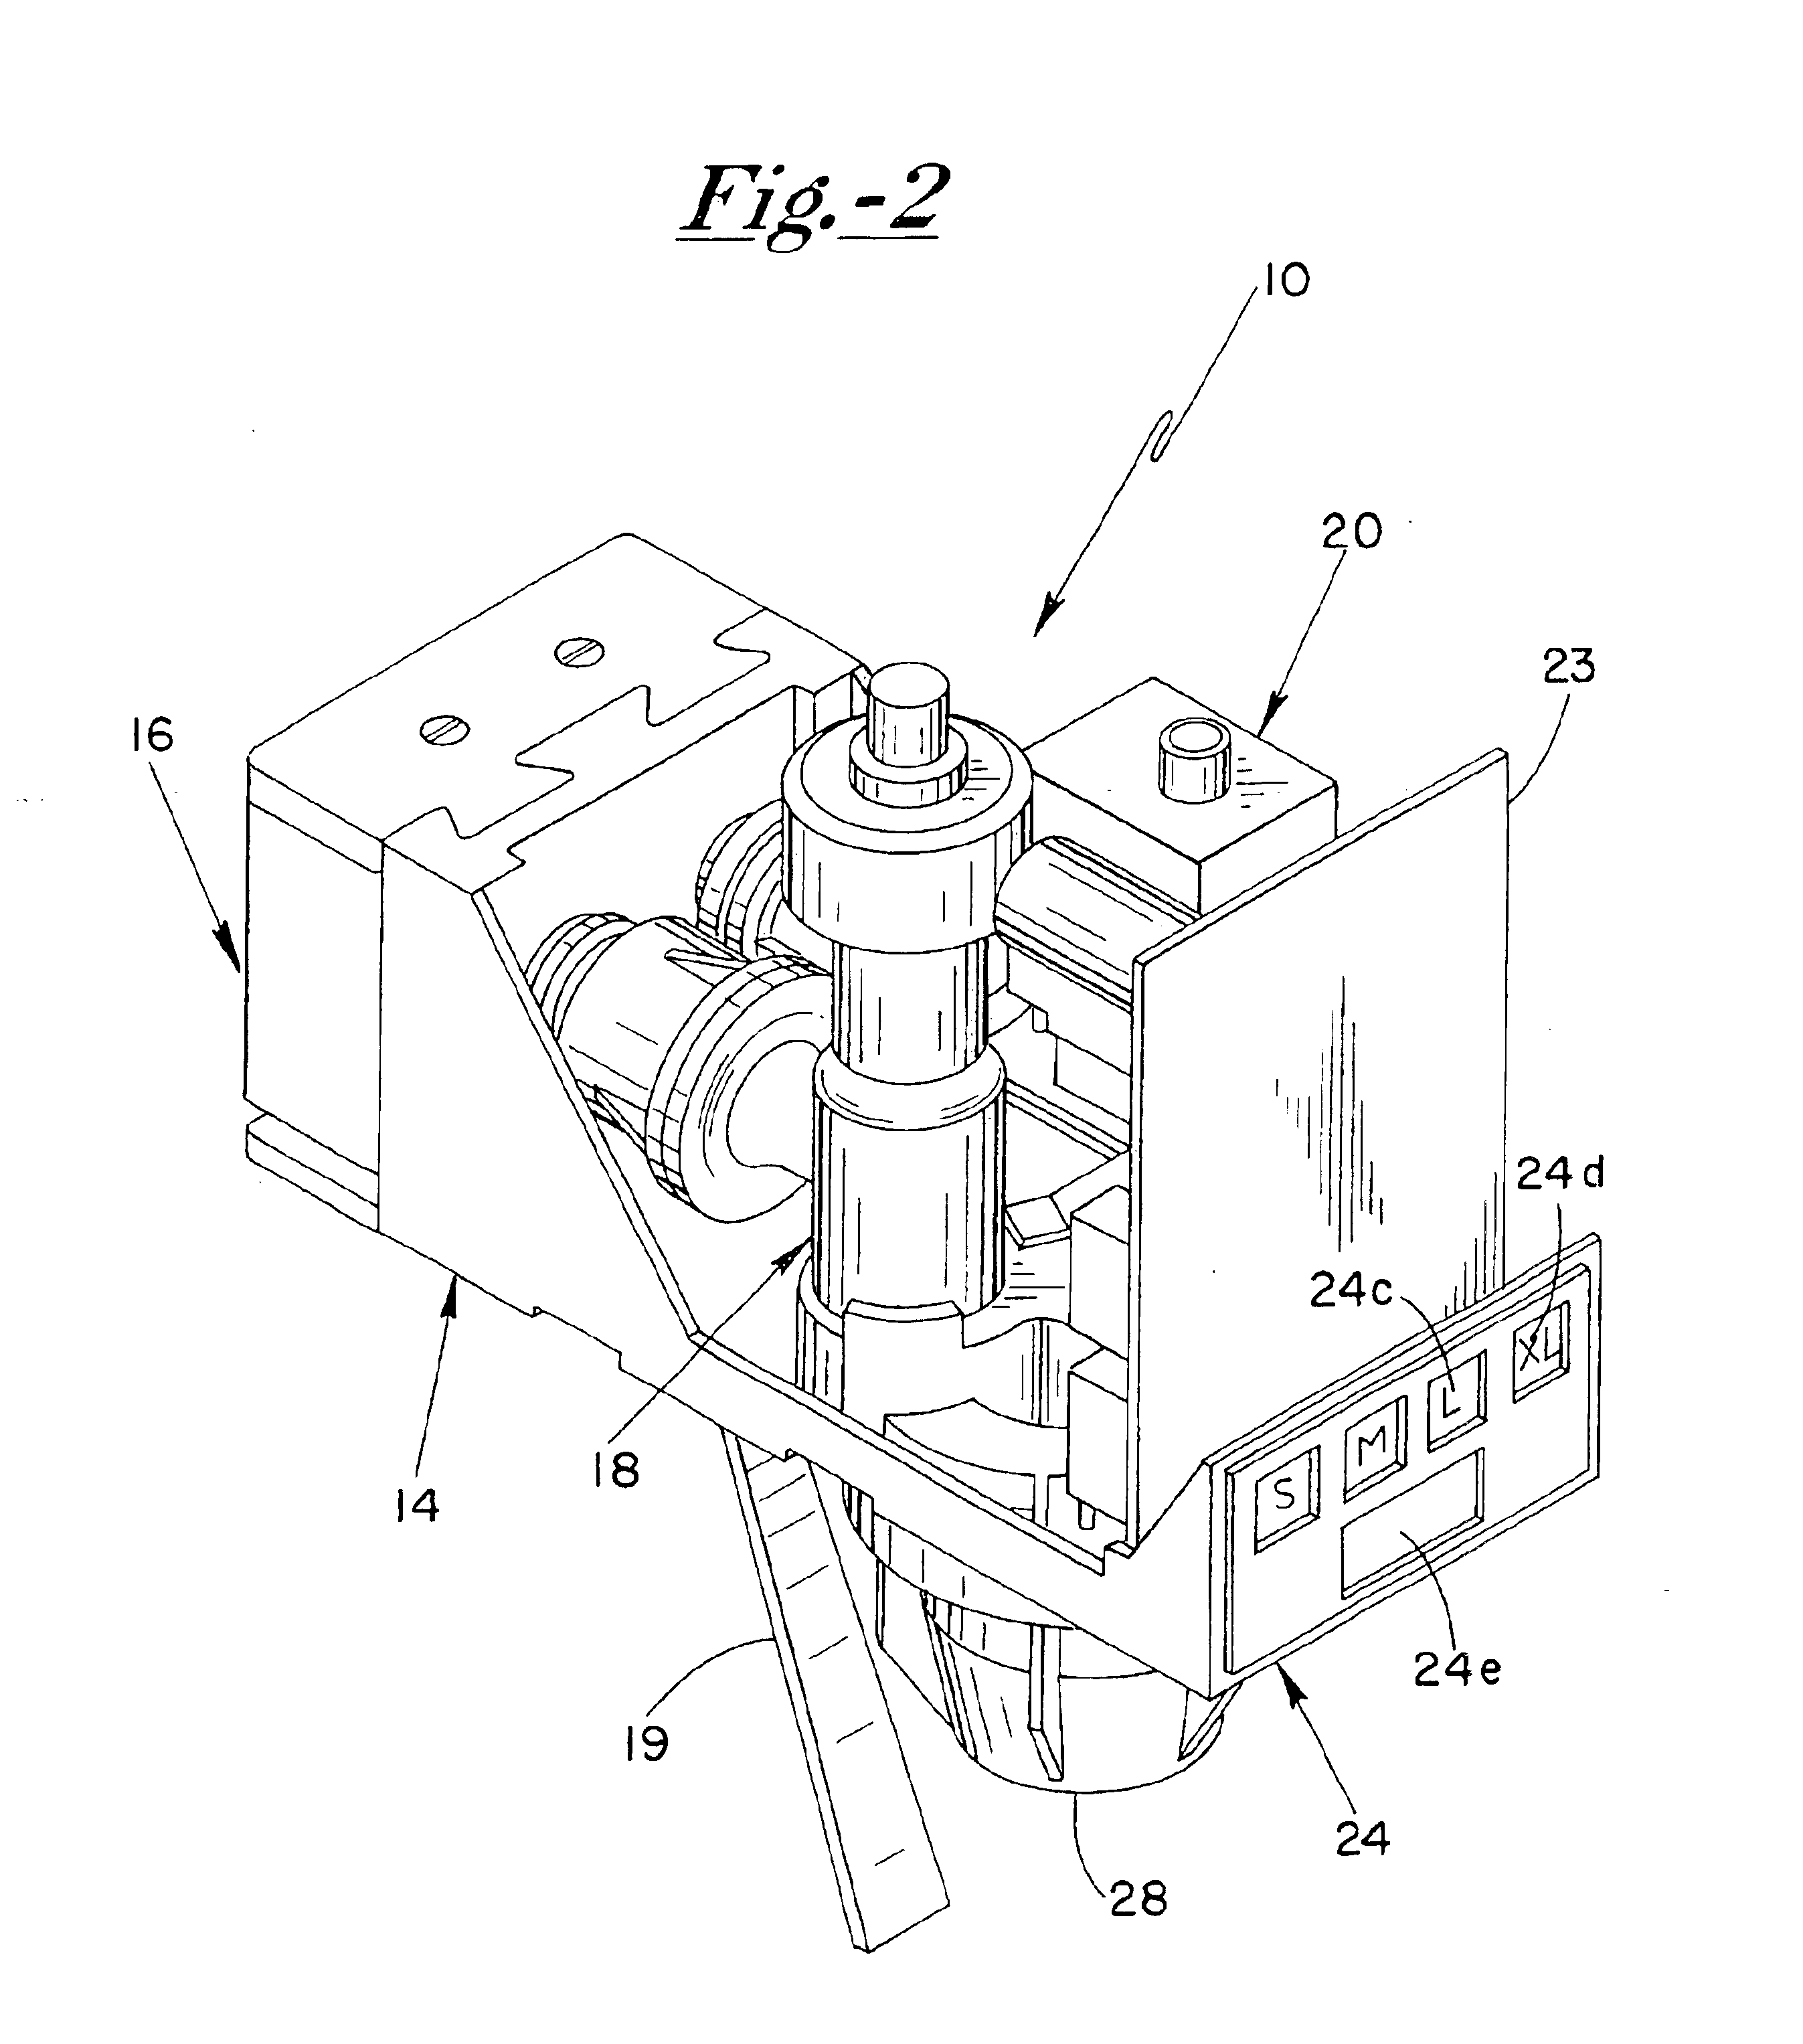 Valve for dispensing two liquids at a predetermined ratio